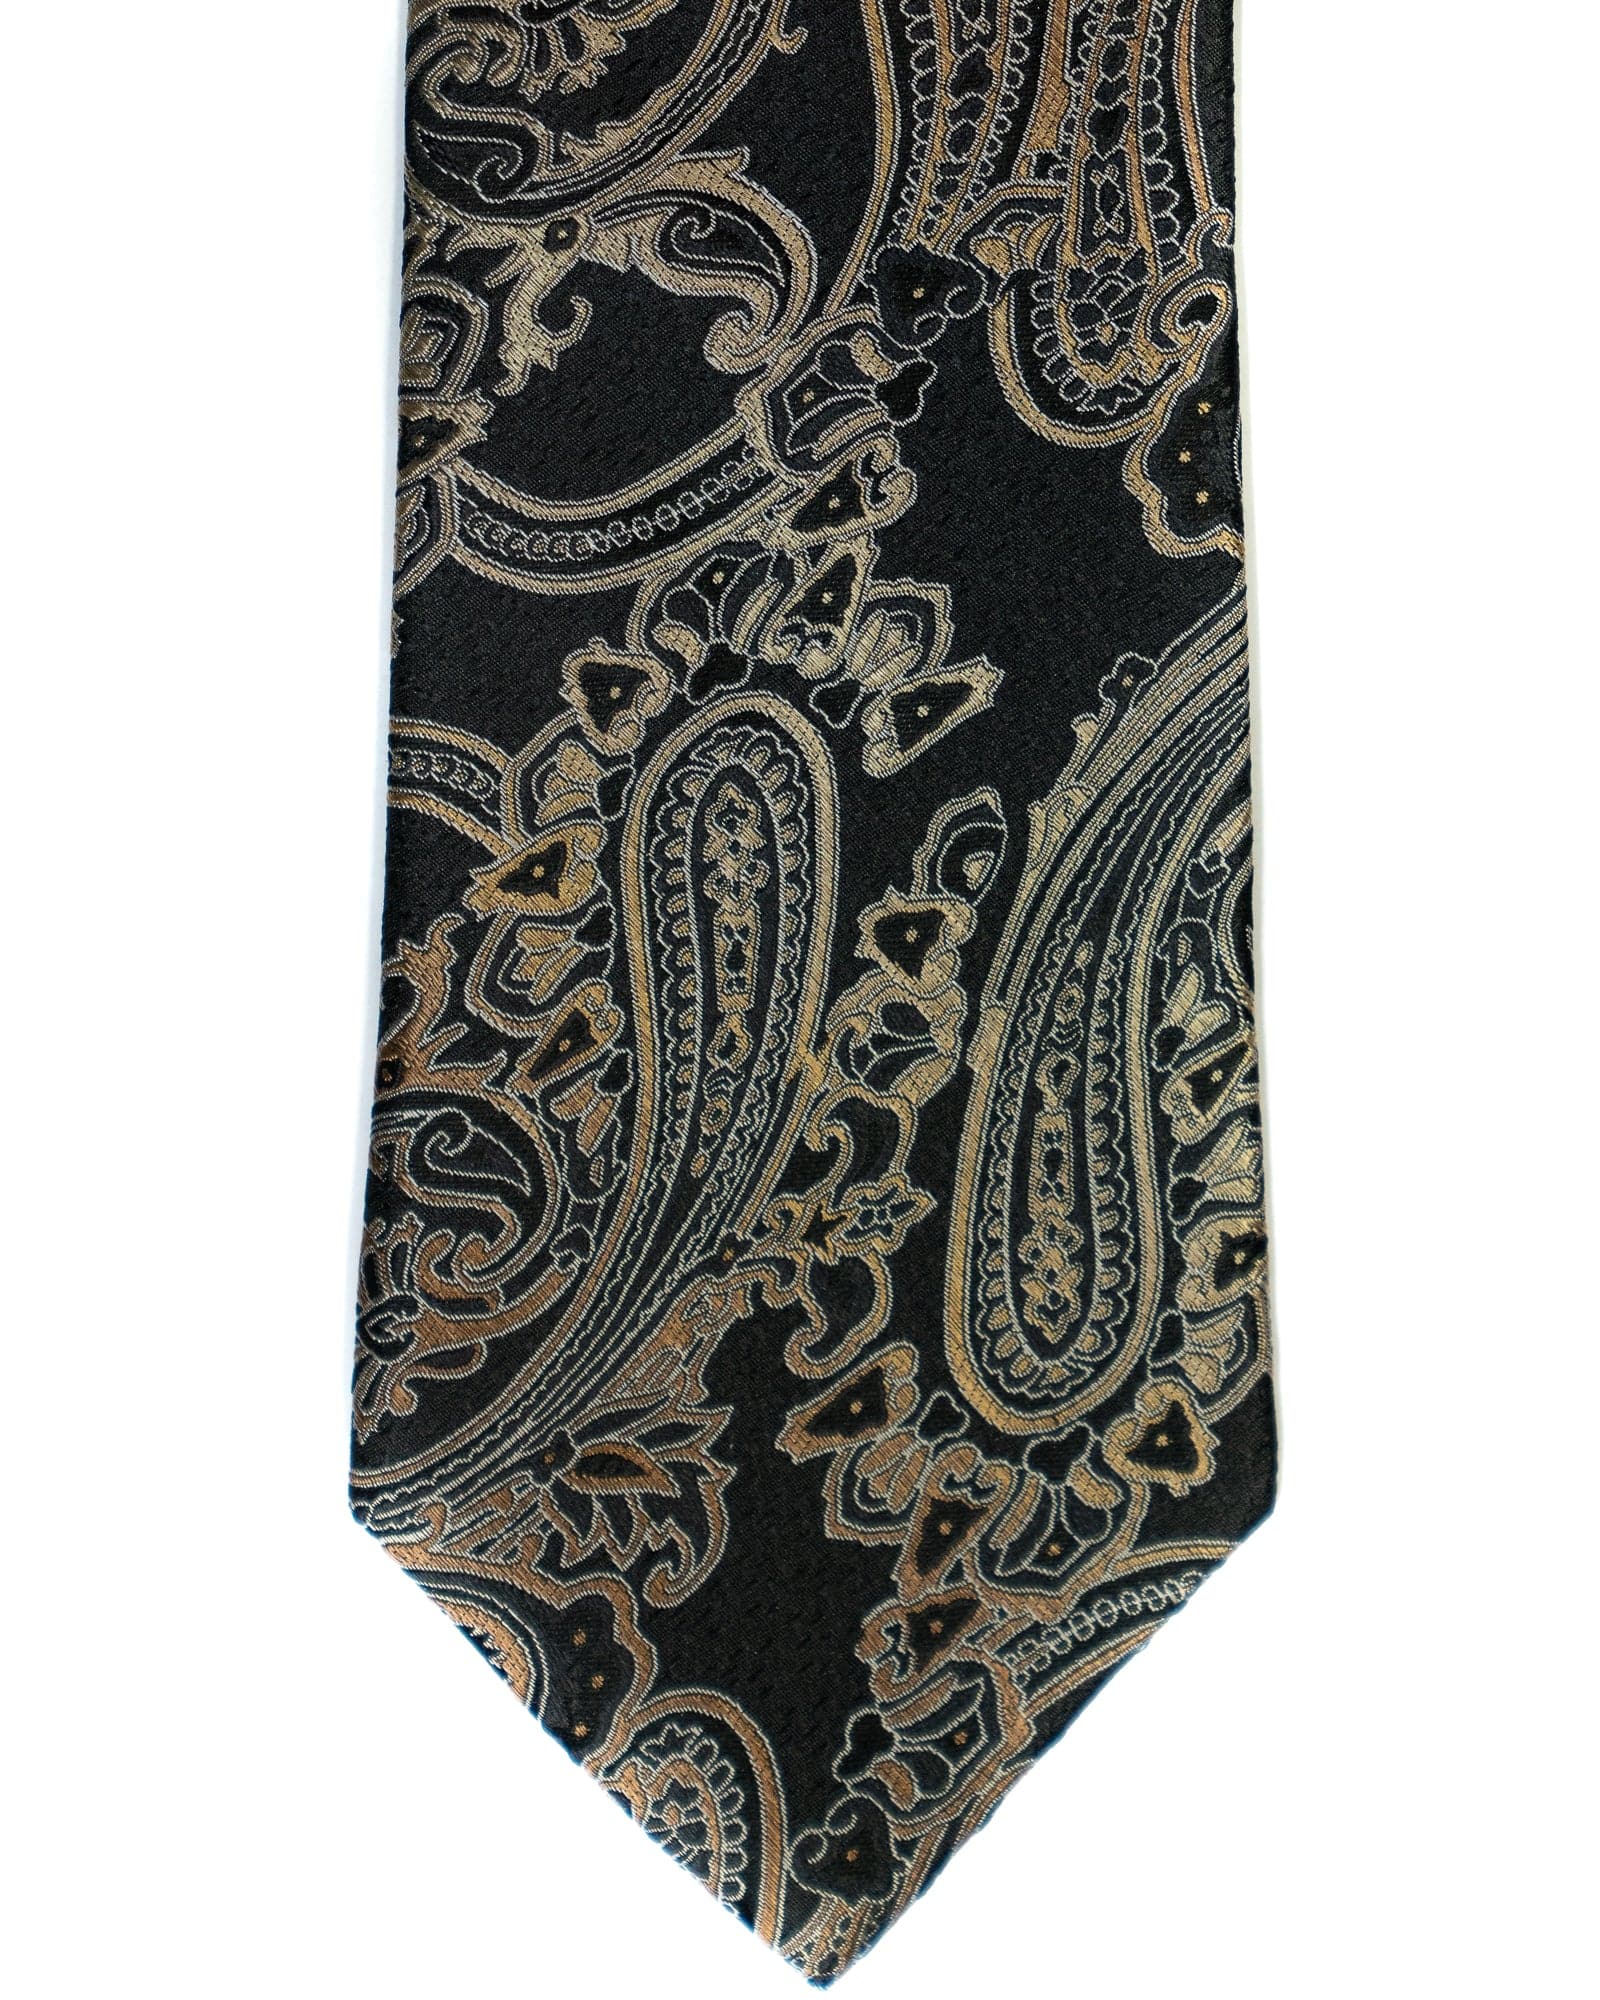 Paisley Silk Tie in Black With Tan - Rainwater's Men's Clothing and Tuxedo Rental